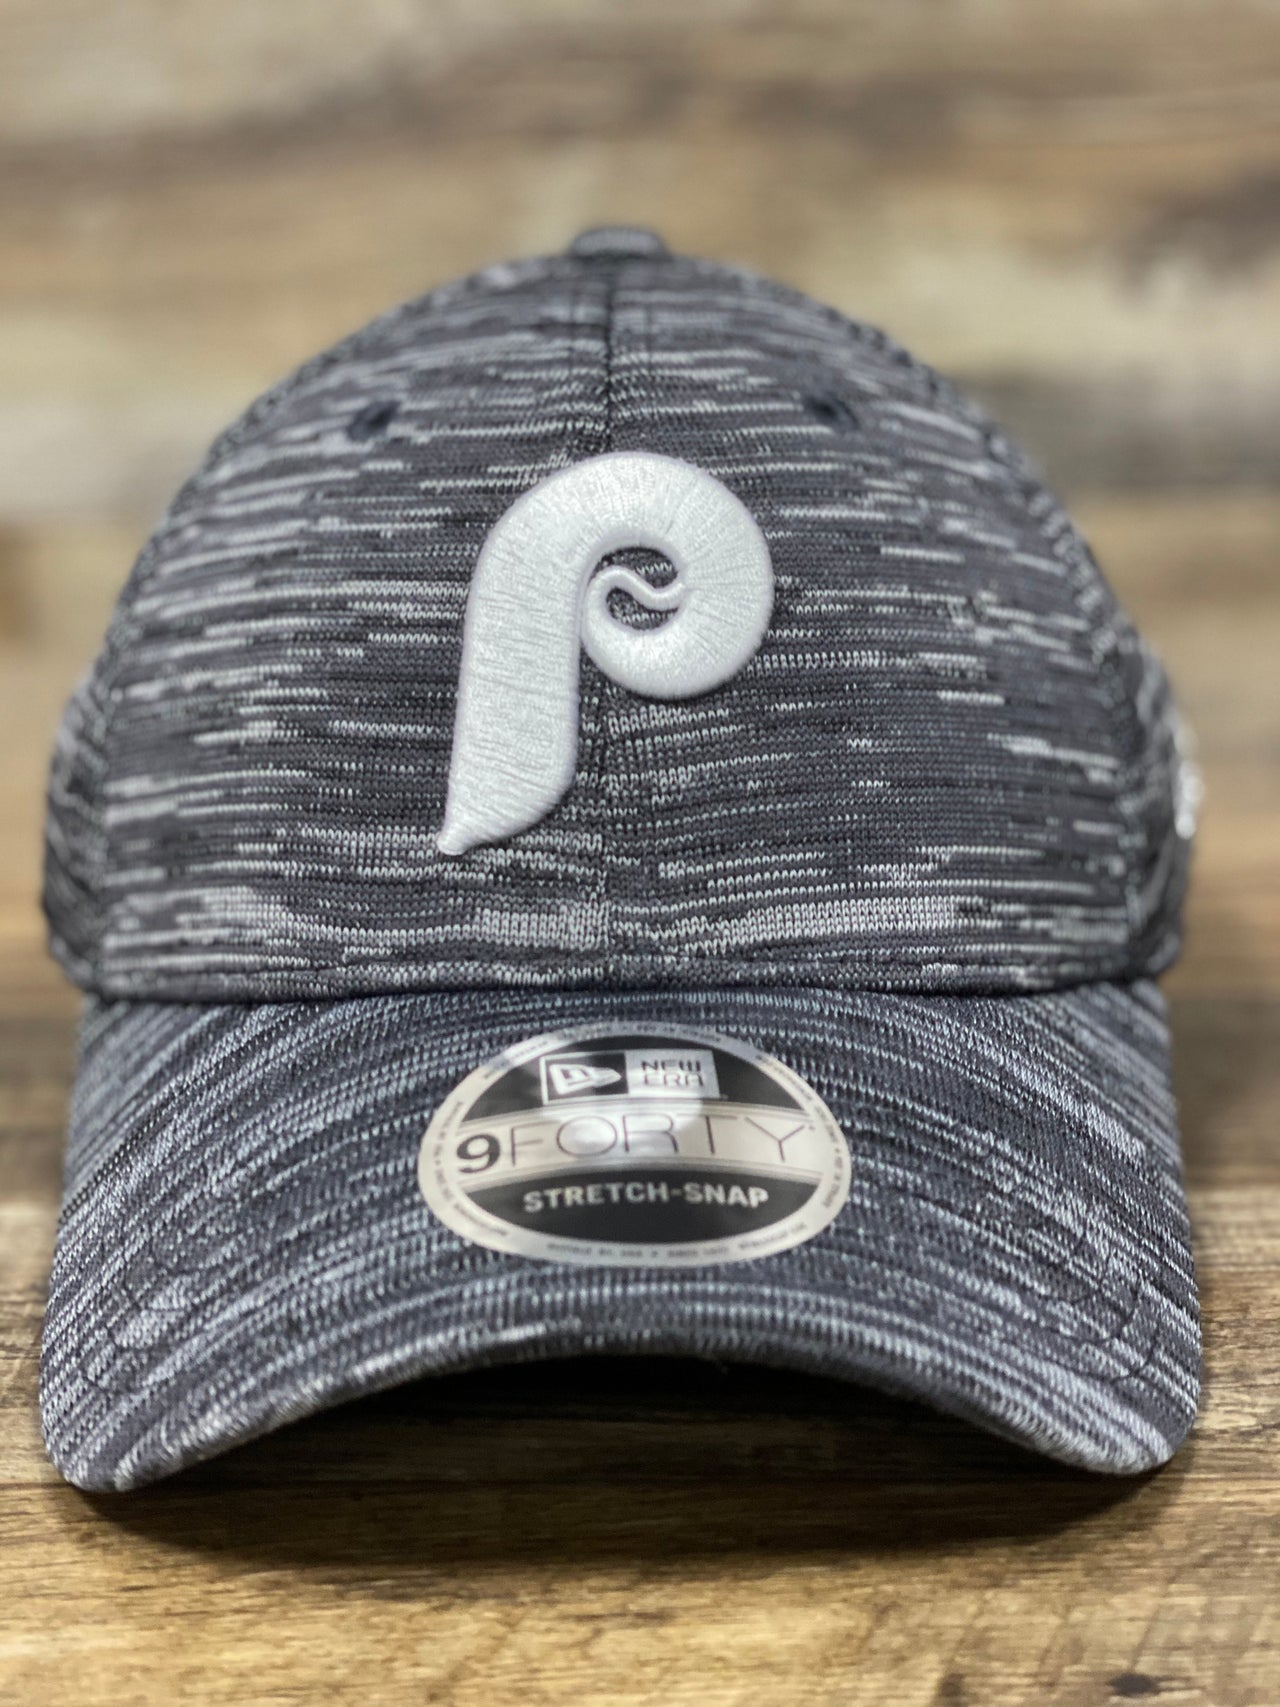 on the front of the Philadelphia Phillies Retro Logo Space-Dye Gray Trucker Dad Hat is a 1970s vintage Phils P logo